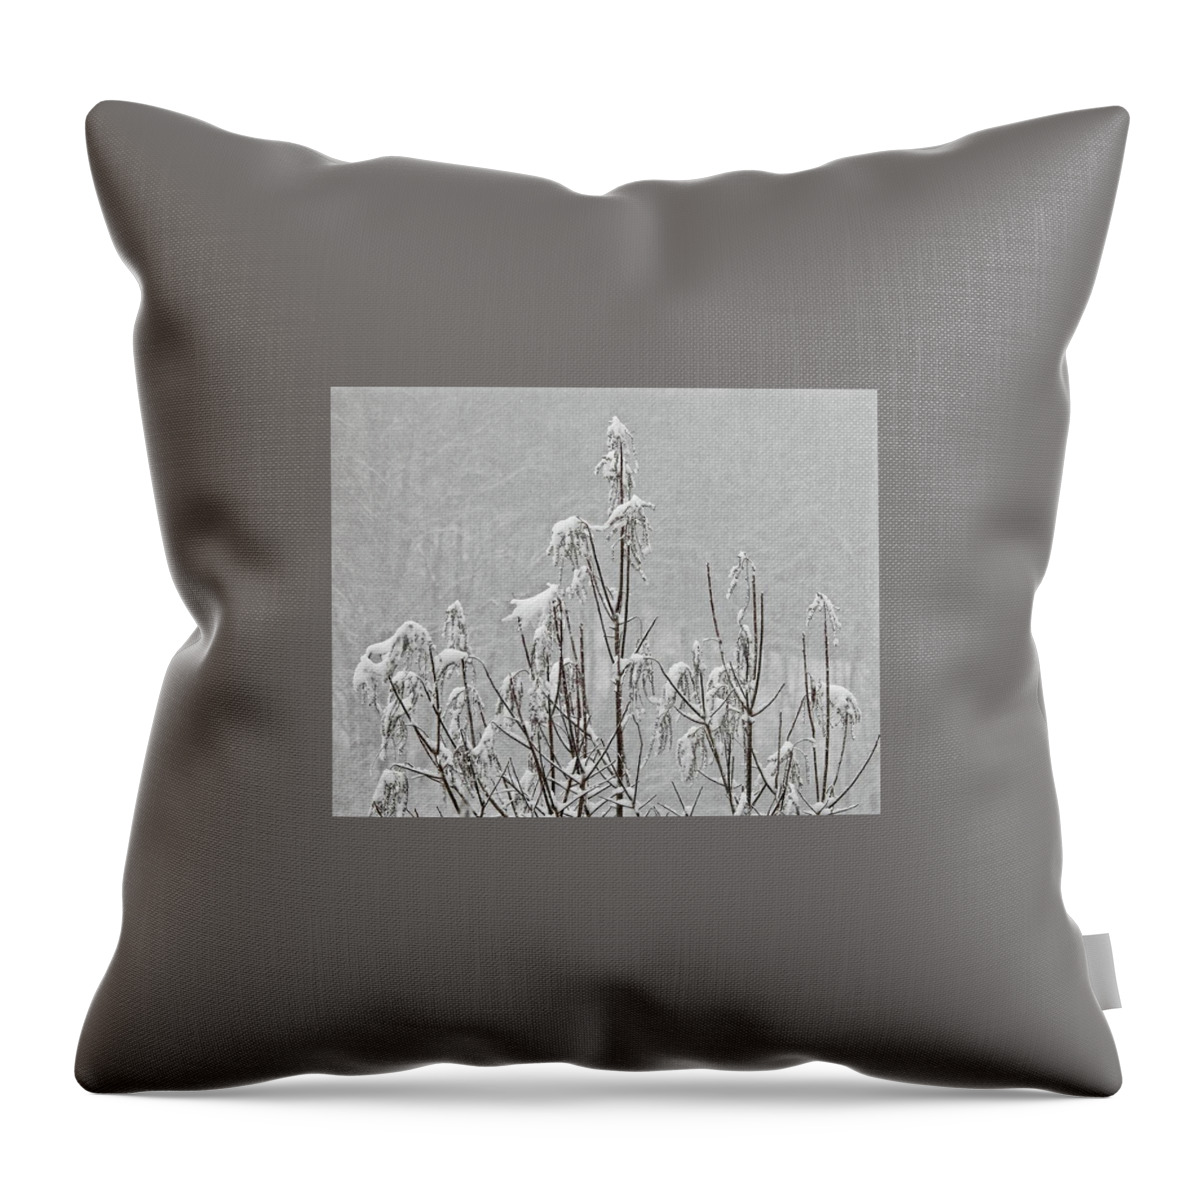 Winter Throw Pillow featuring the photograph Snow Dance by Kathy Ozzard Chism